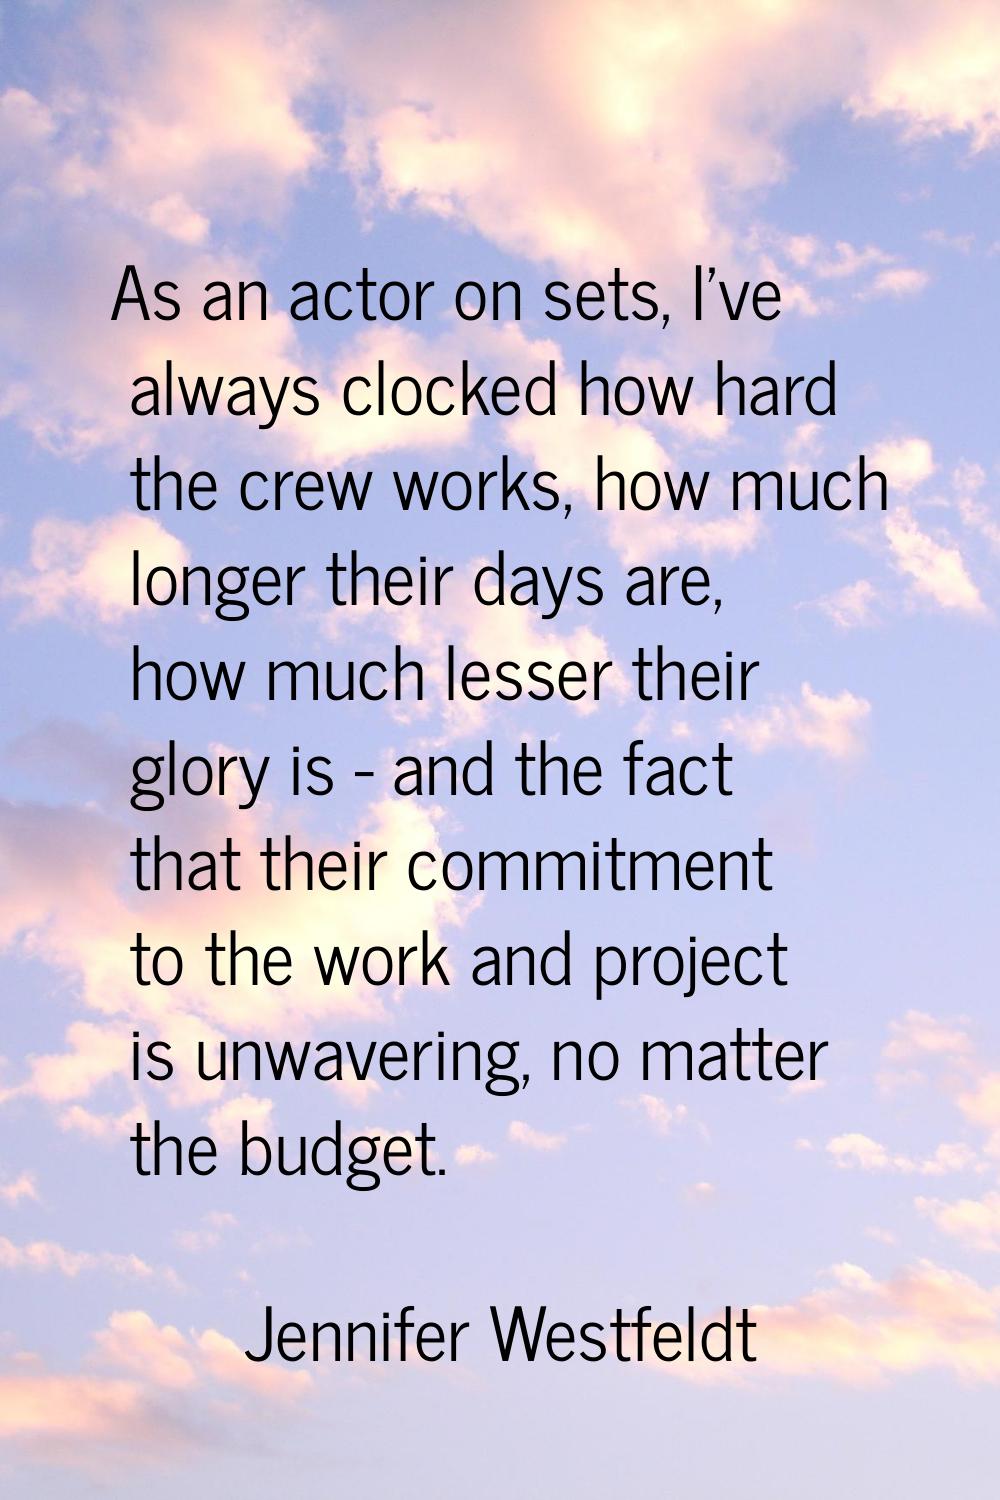 As an actor on sets, I've always clocked how hard the crew works, how much longer their days are, h